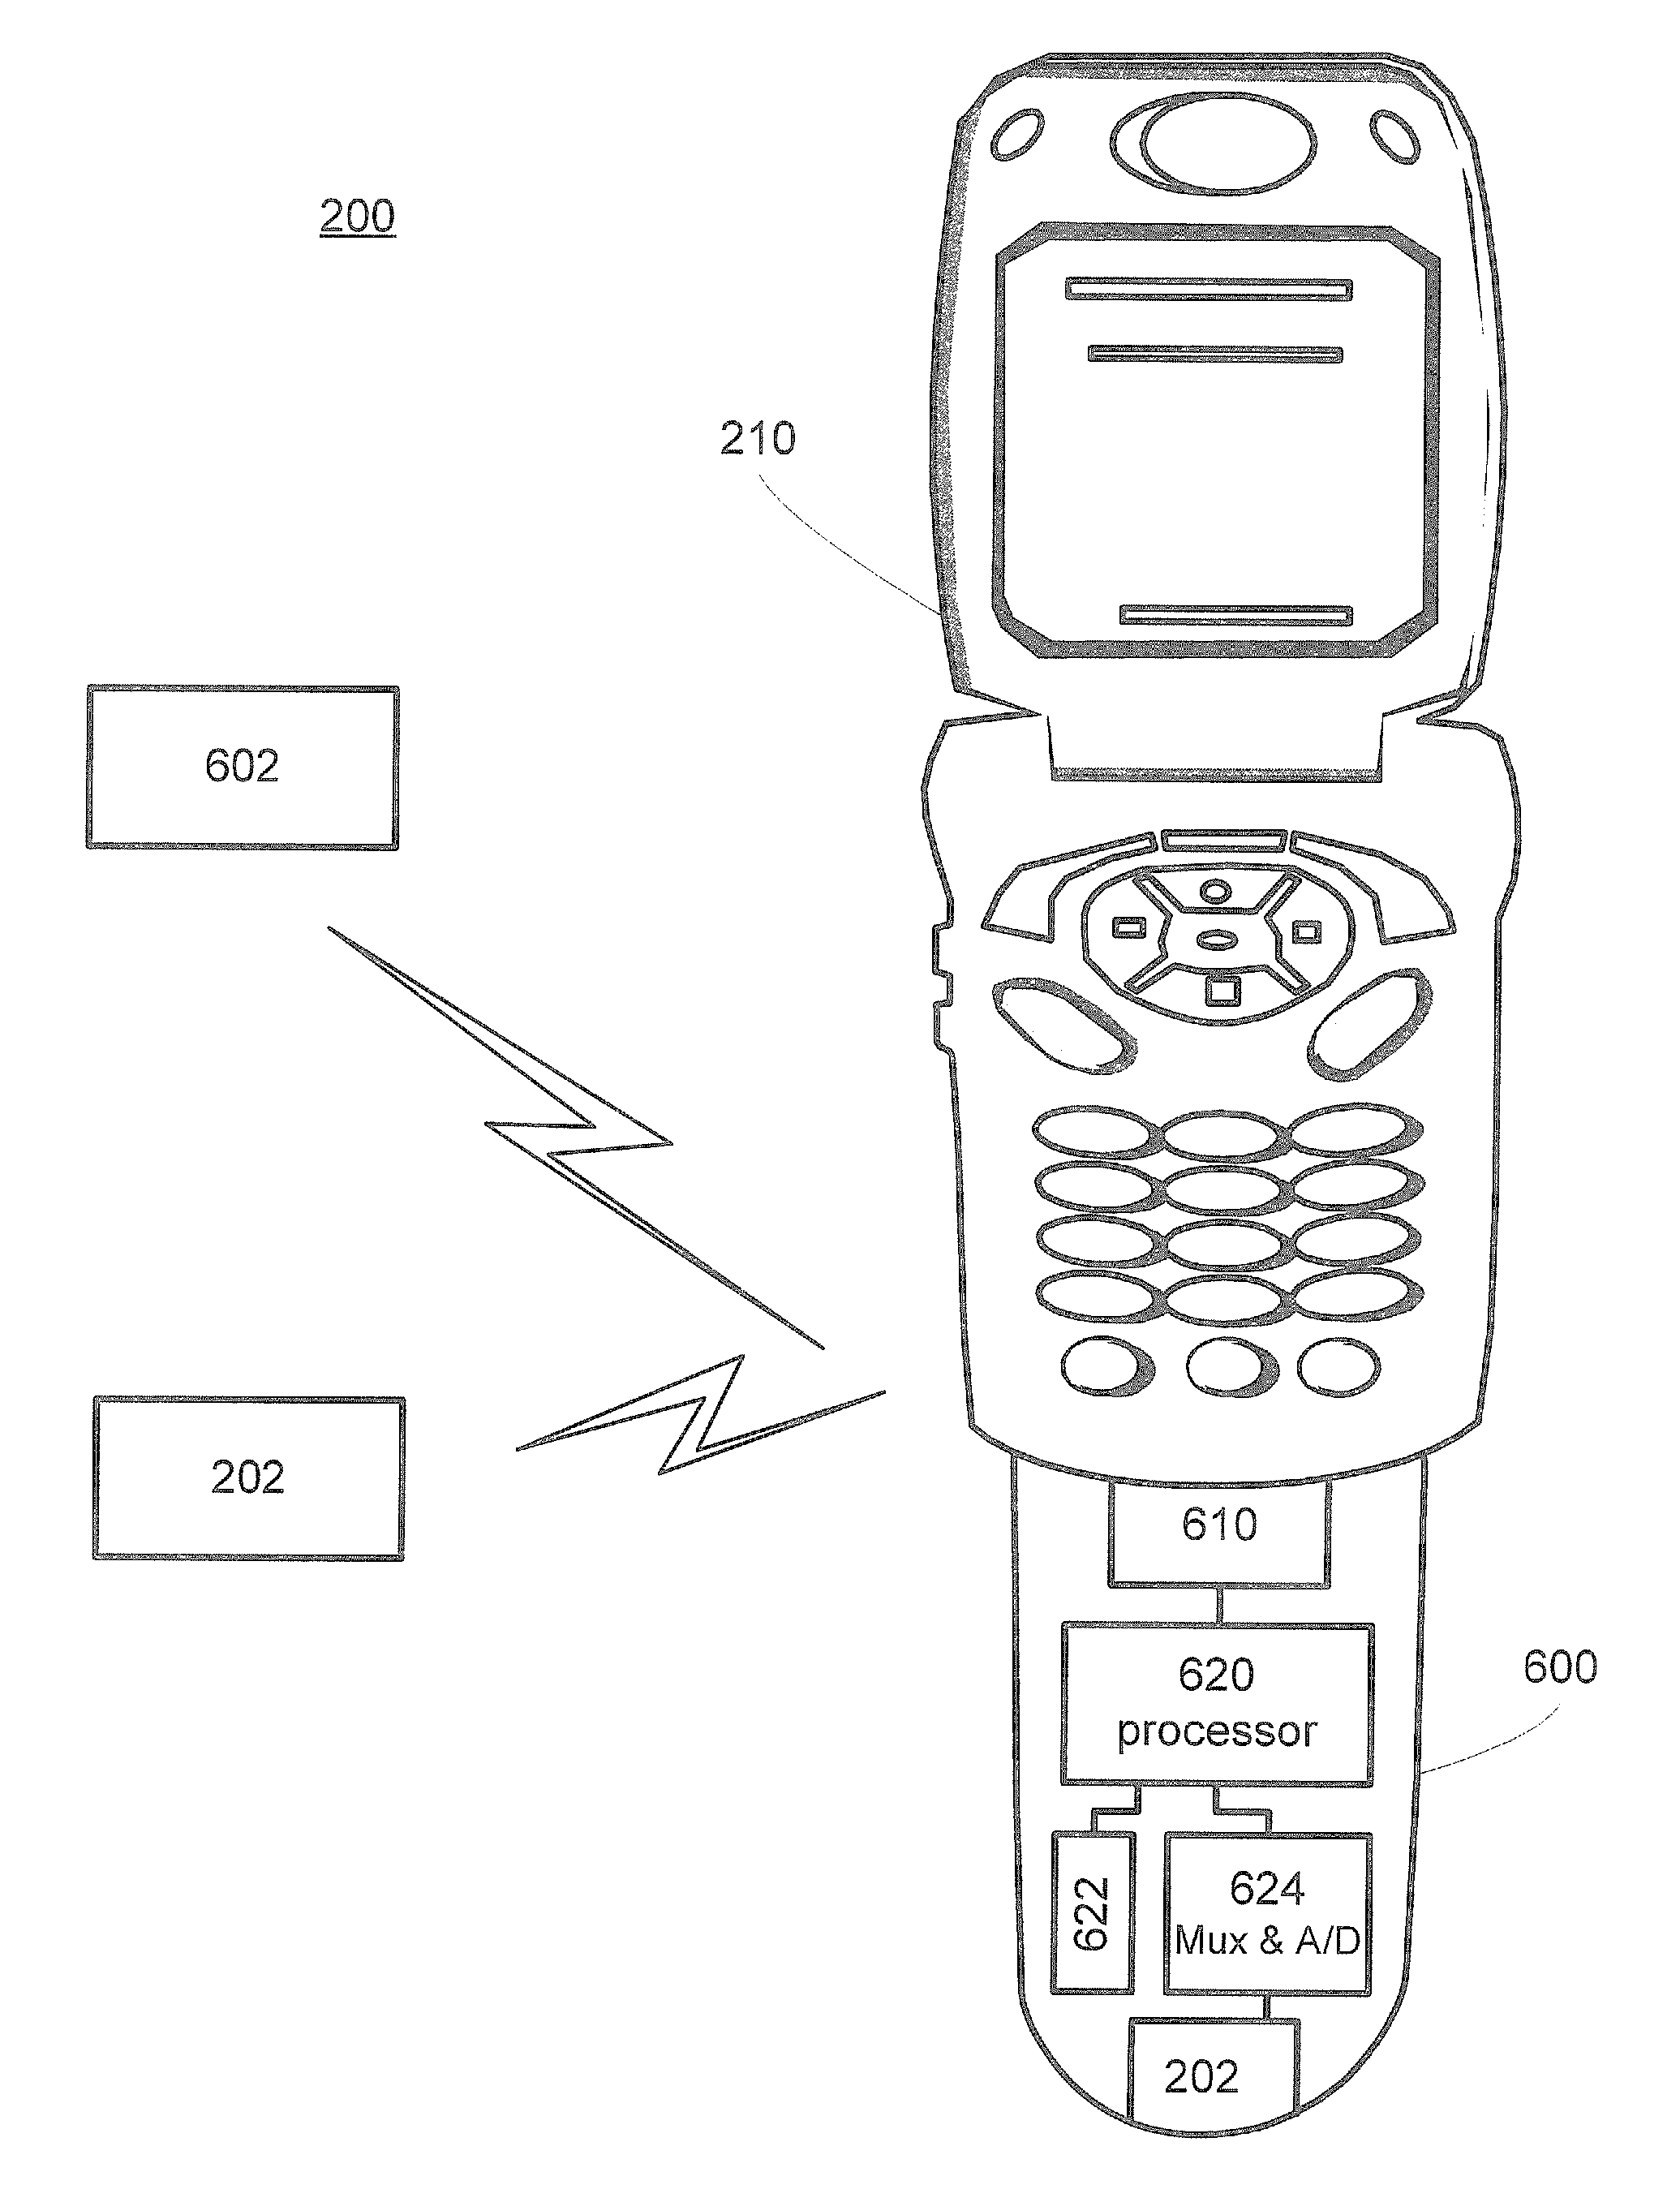 System and a method for physiological monitoring